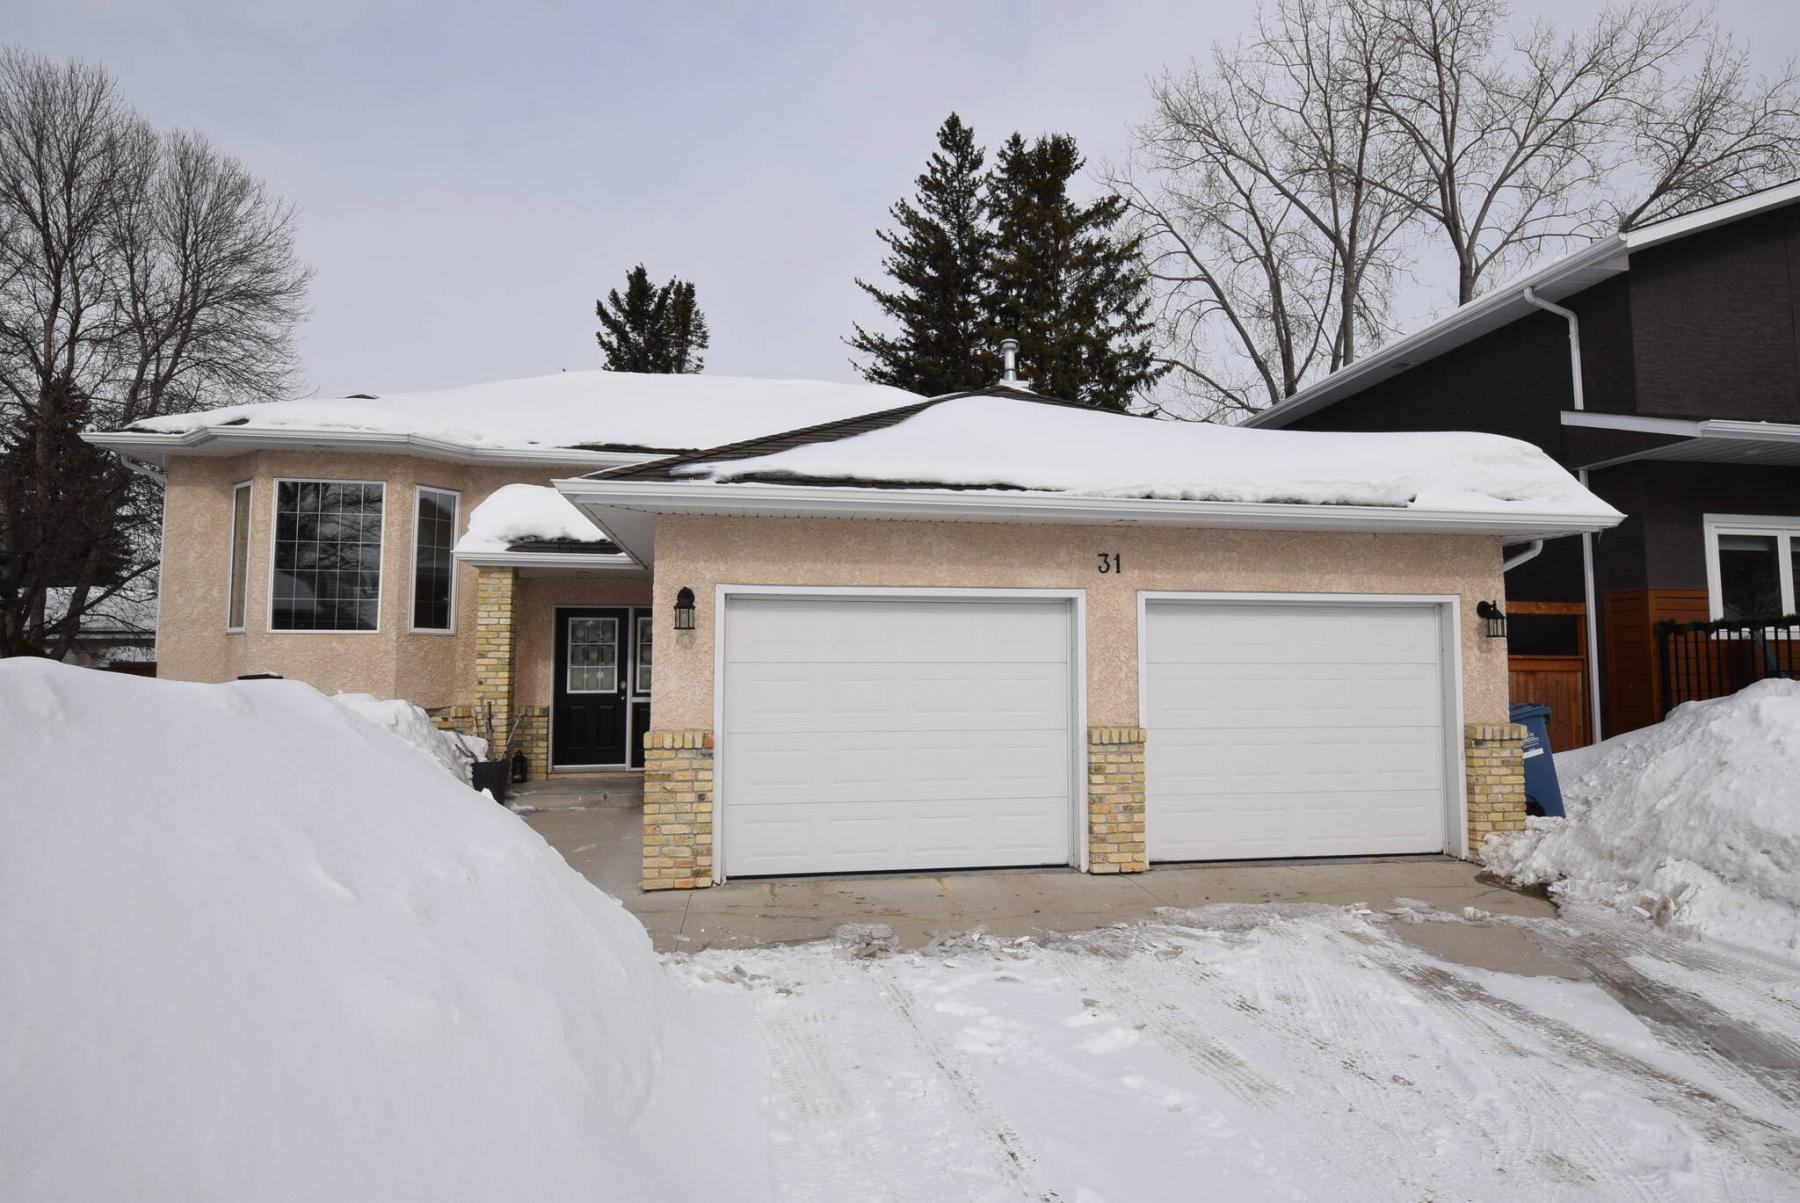 <p>Photos by Todd Lewys / Winnipeg Free Press</p><p>Custom built in 2000, the immaculate, move-in-ready bi-level is situated in a quiet, mature pocket of St. Vital&rsquo;s Bright Oaks neighbourhood.</p>